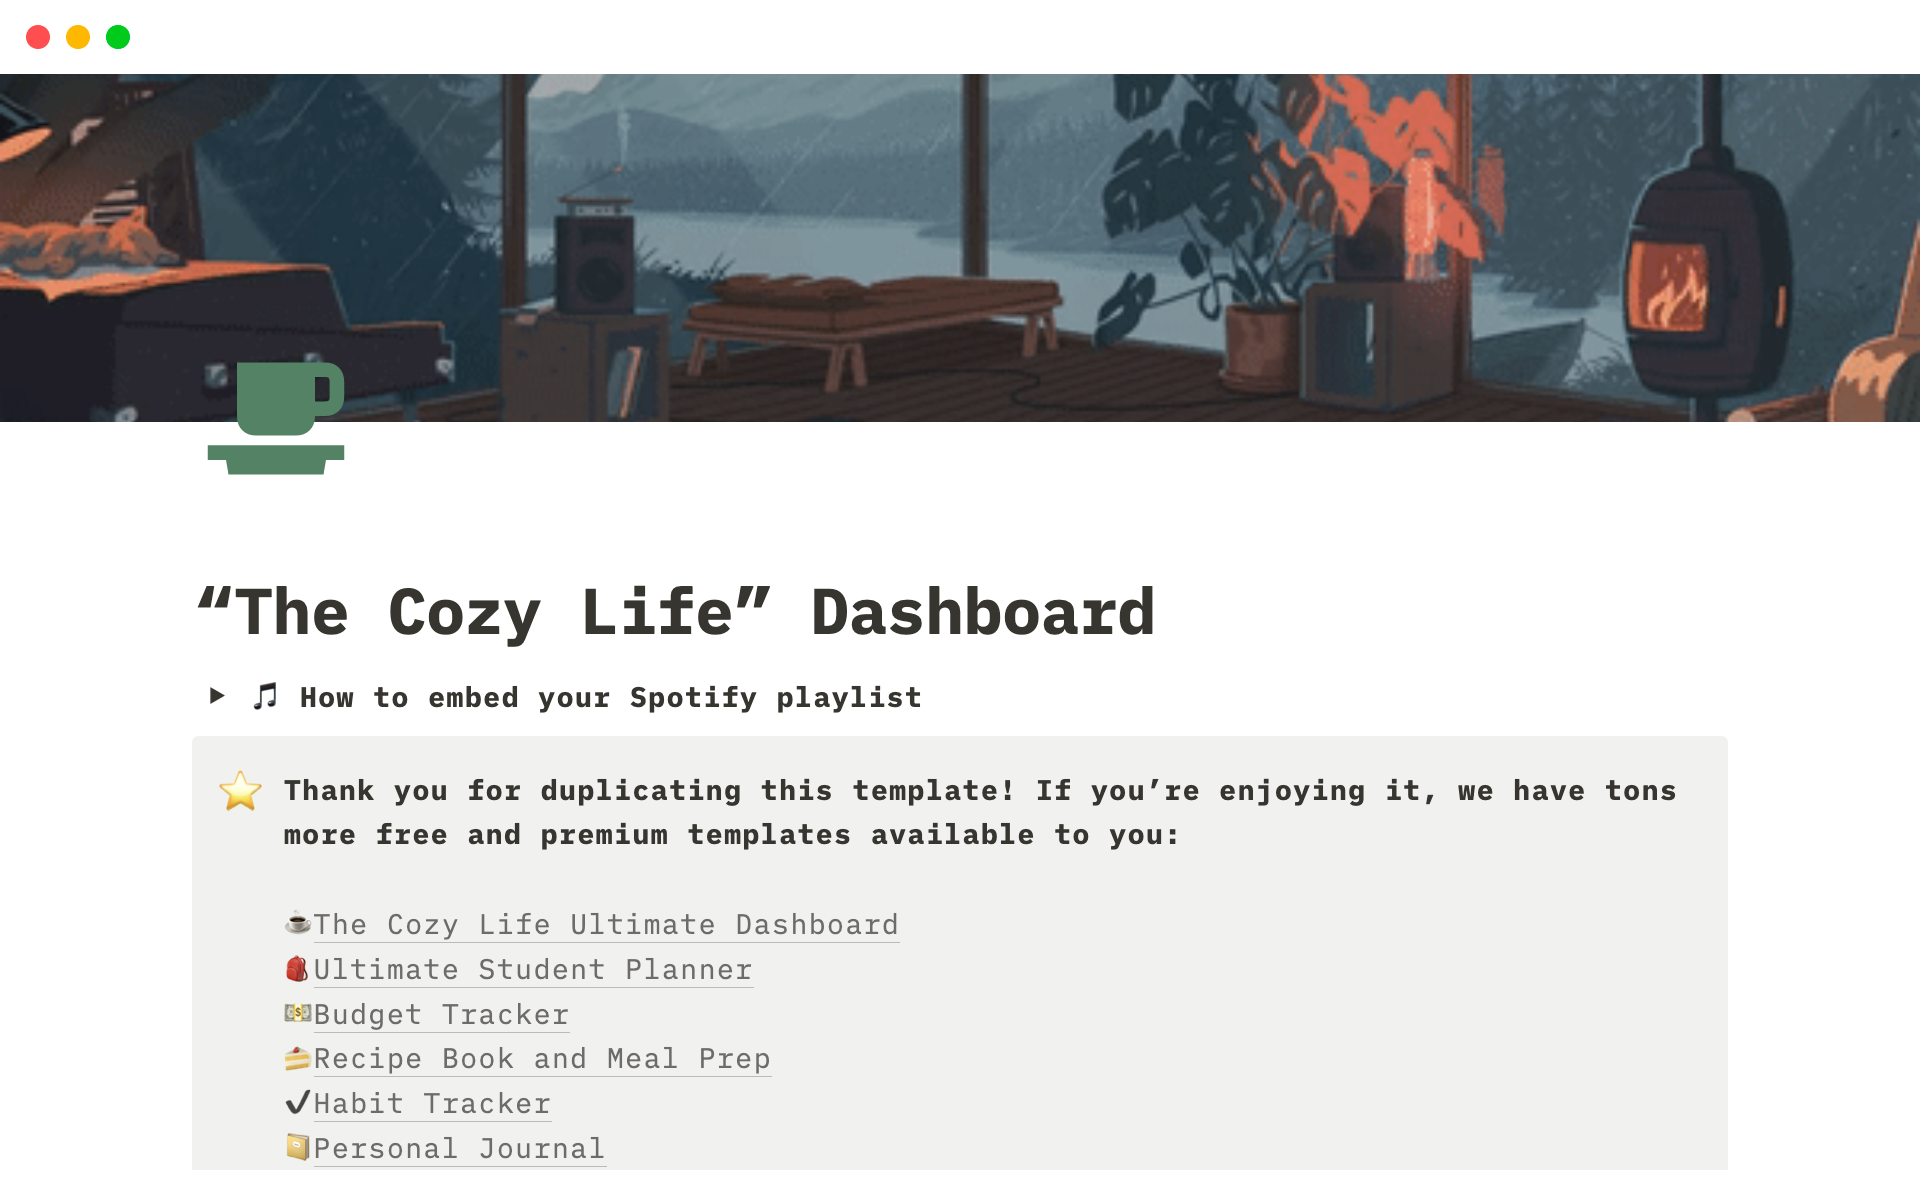 The Cozy Life Dashboard is an aesthetic Notion template to track your habits, favorite movies, life goals, classes, and more.